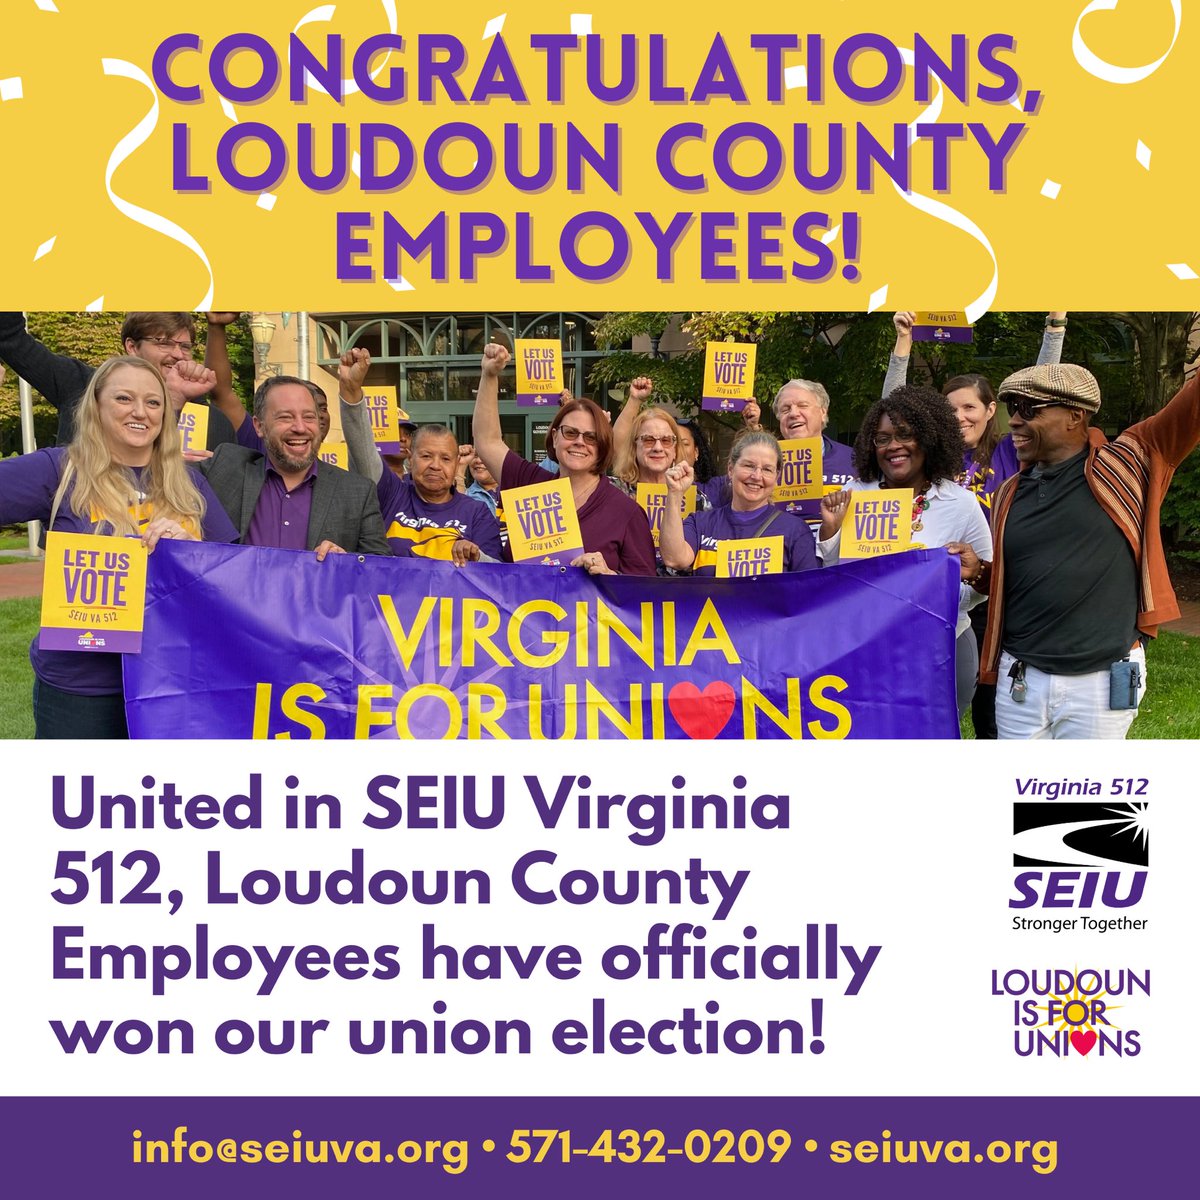 🎉 VICTORY! 🎉 Just moments ago, #Loudoun County employees WON our historic union election! 🎊

We have organized nonstop to ensure workers across #Virginia are respected, protected & paid. Next stop: a strong first union contract!
#UnionsForAll #VirginiaIsForUnions